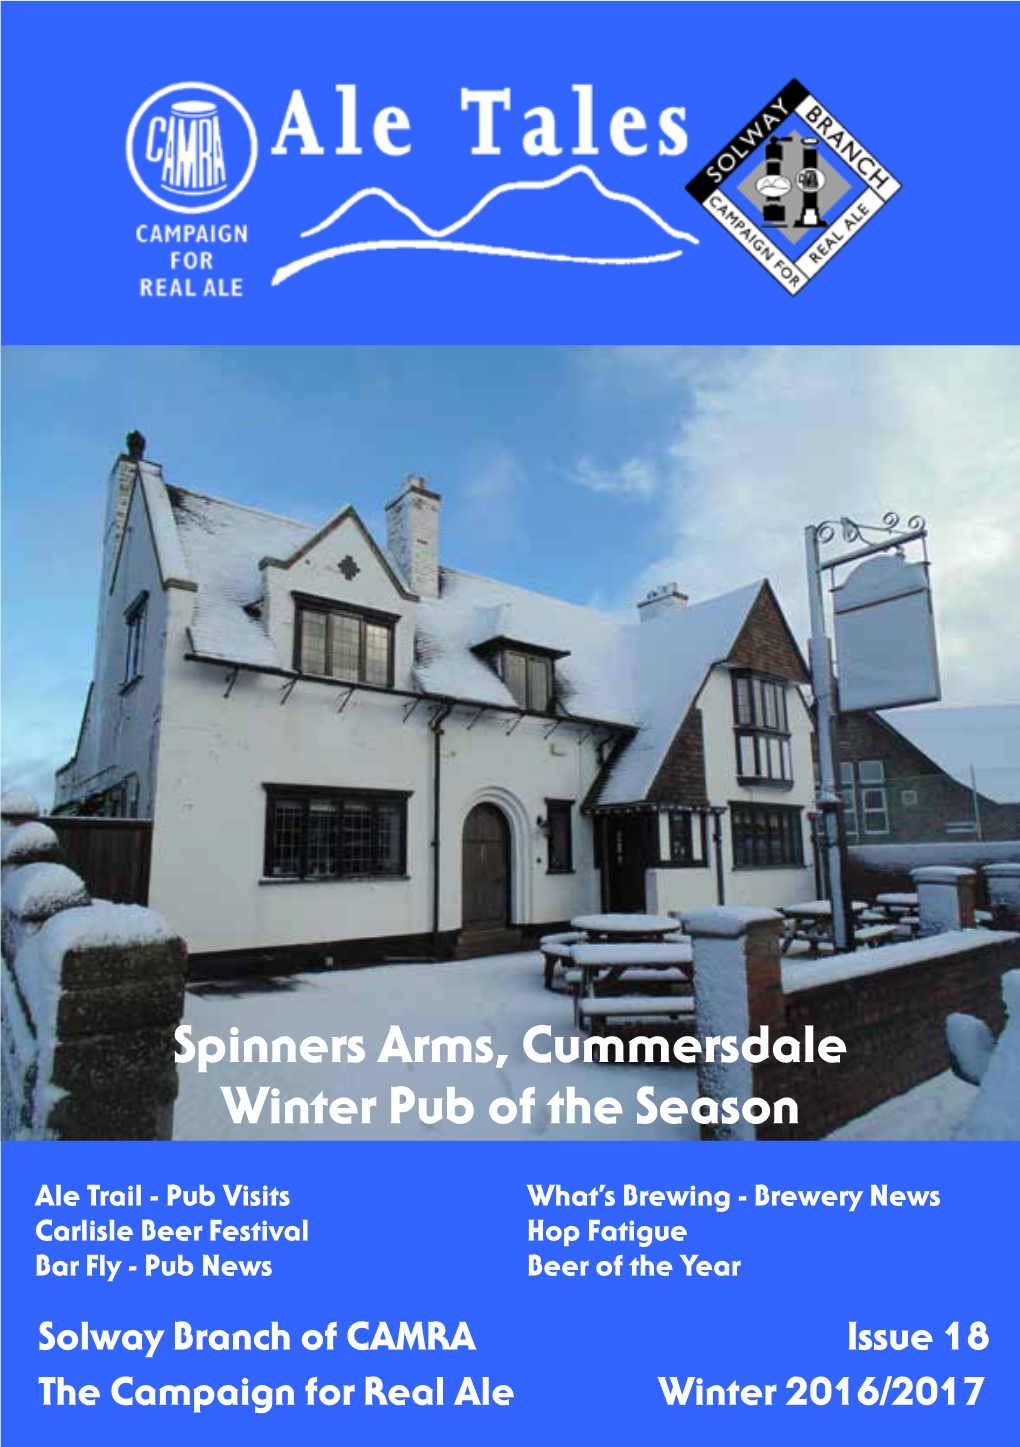 Spinners Arms, Cummersdale Winter Pub of the Season